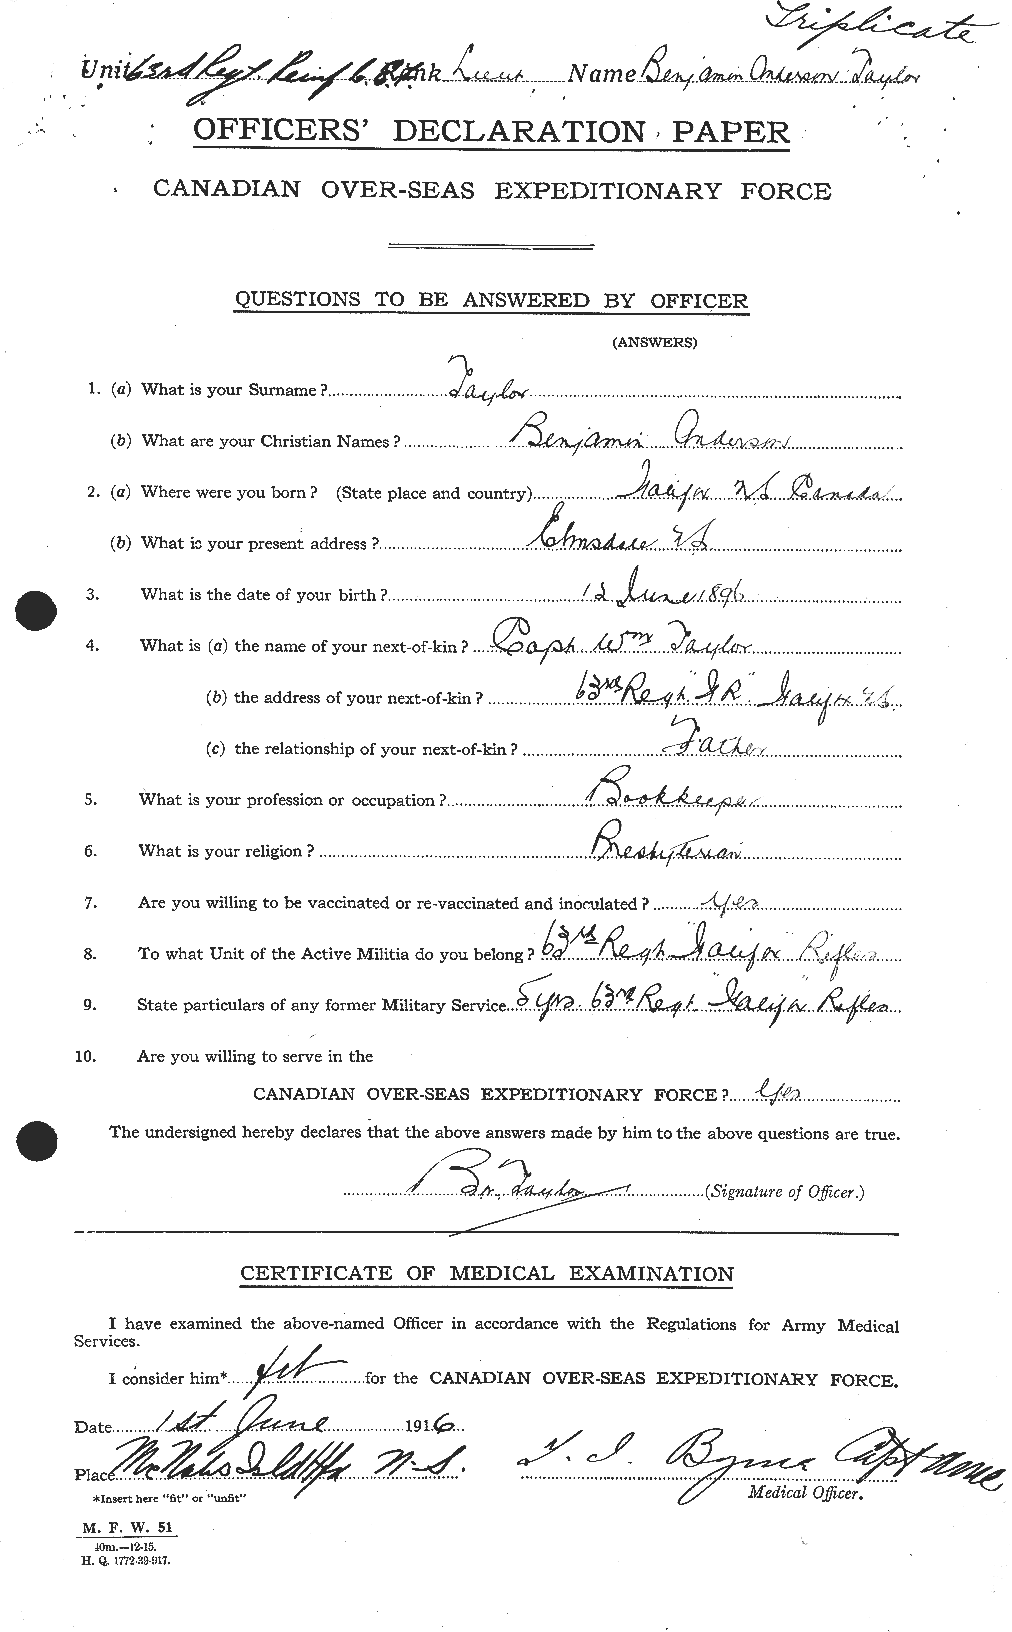 Personnel Records of the First World War - CEF 626762a